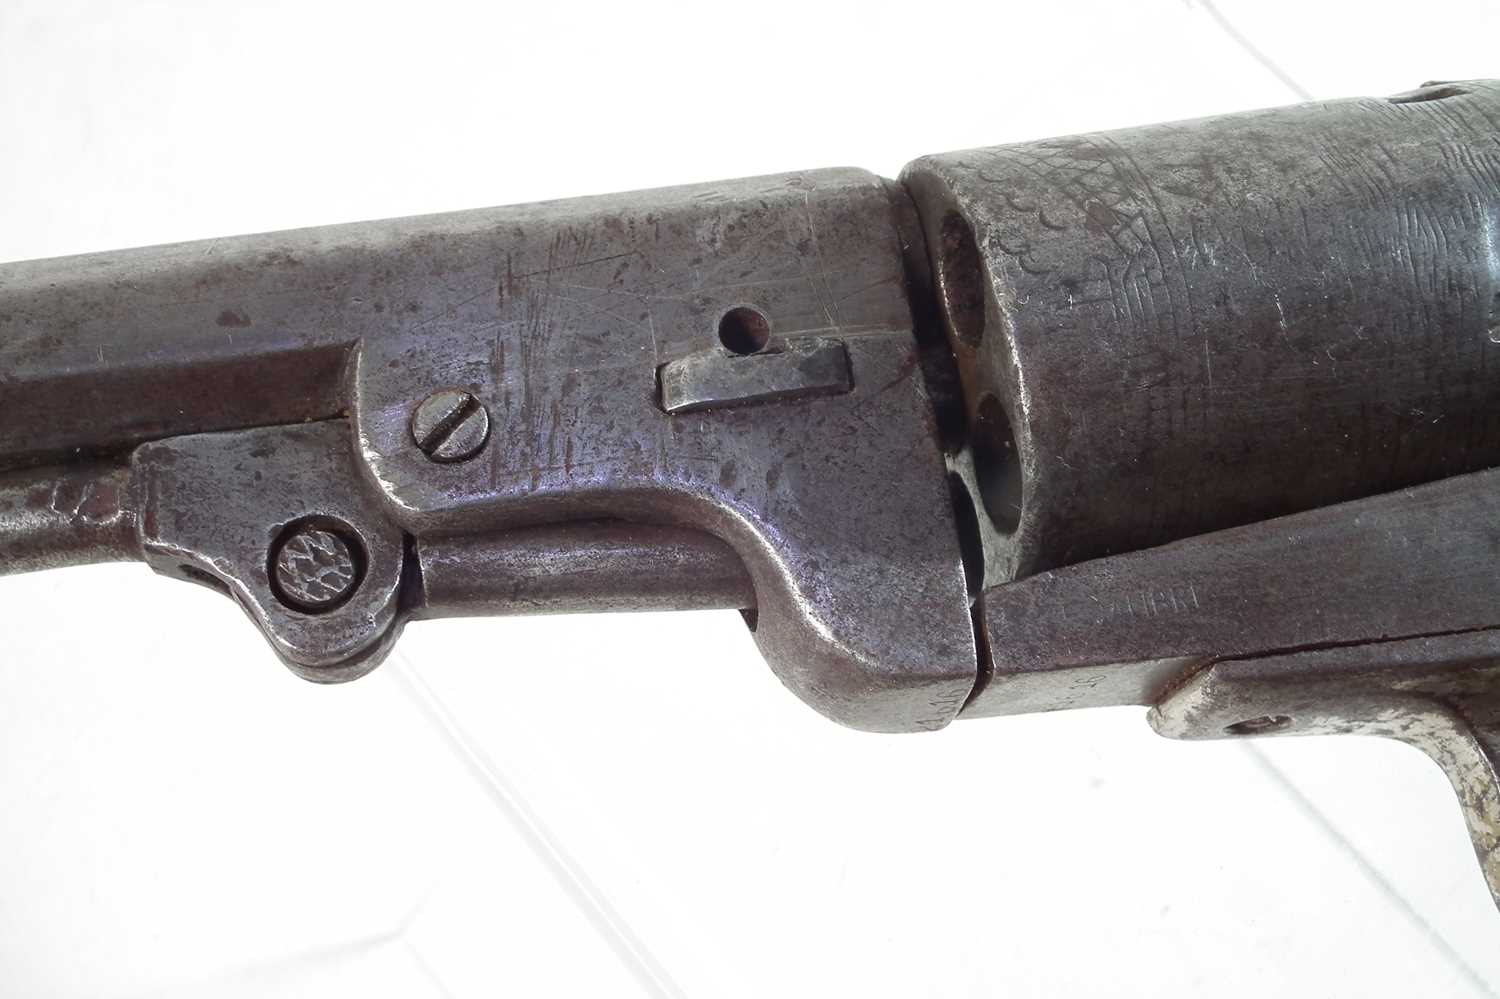 Percussion Colt type revolver probably by Clement arms - Image 7 of 12